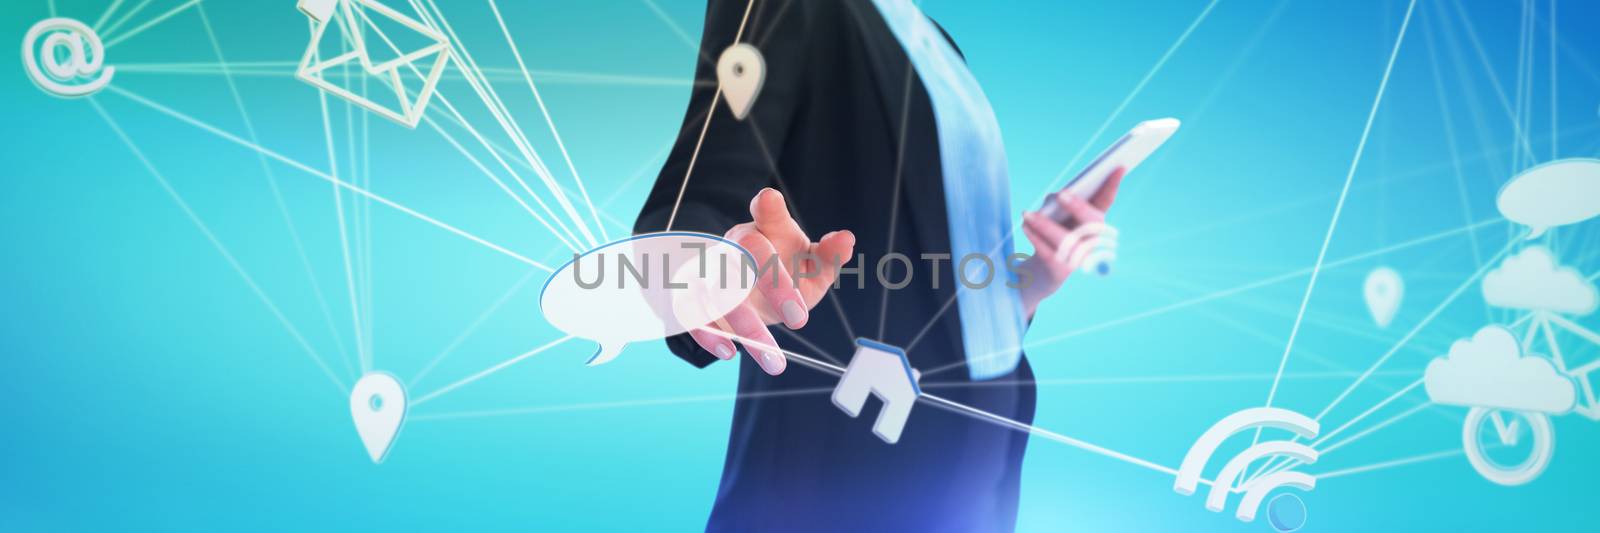 Mid section of businesswoman using mobile phone while using imaginary interface against abstract blue background